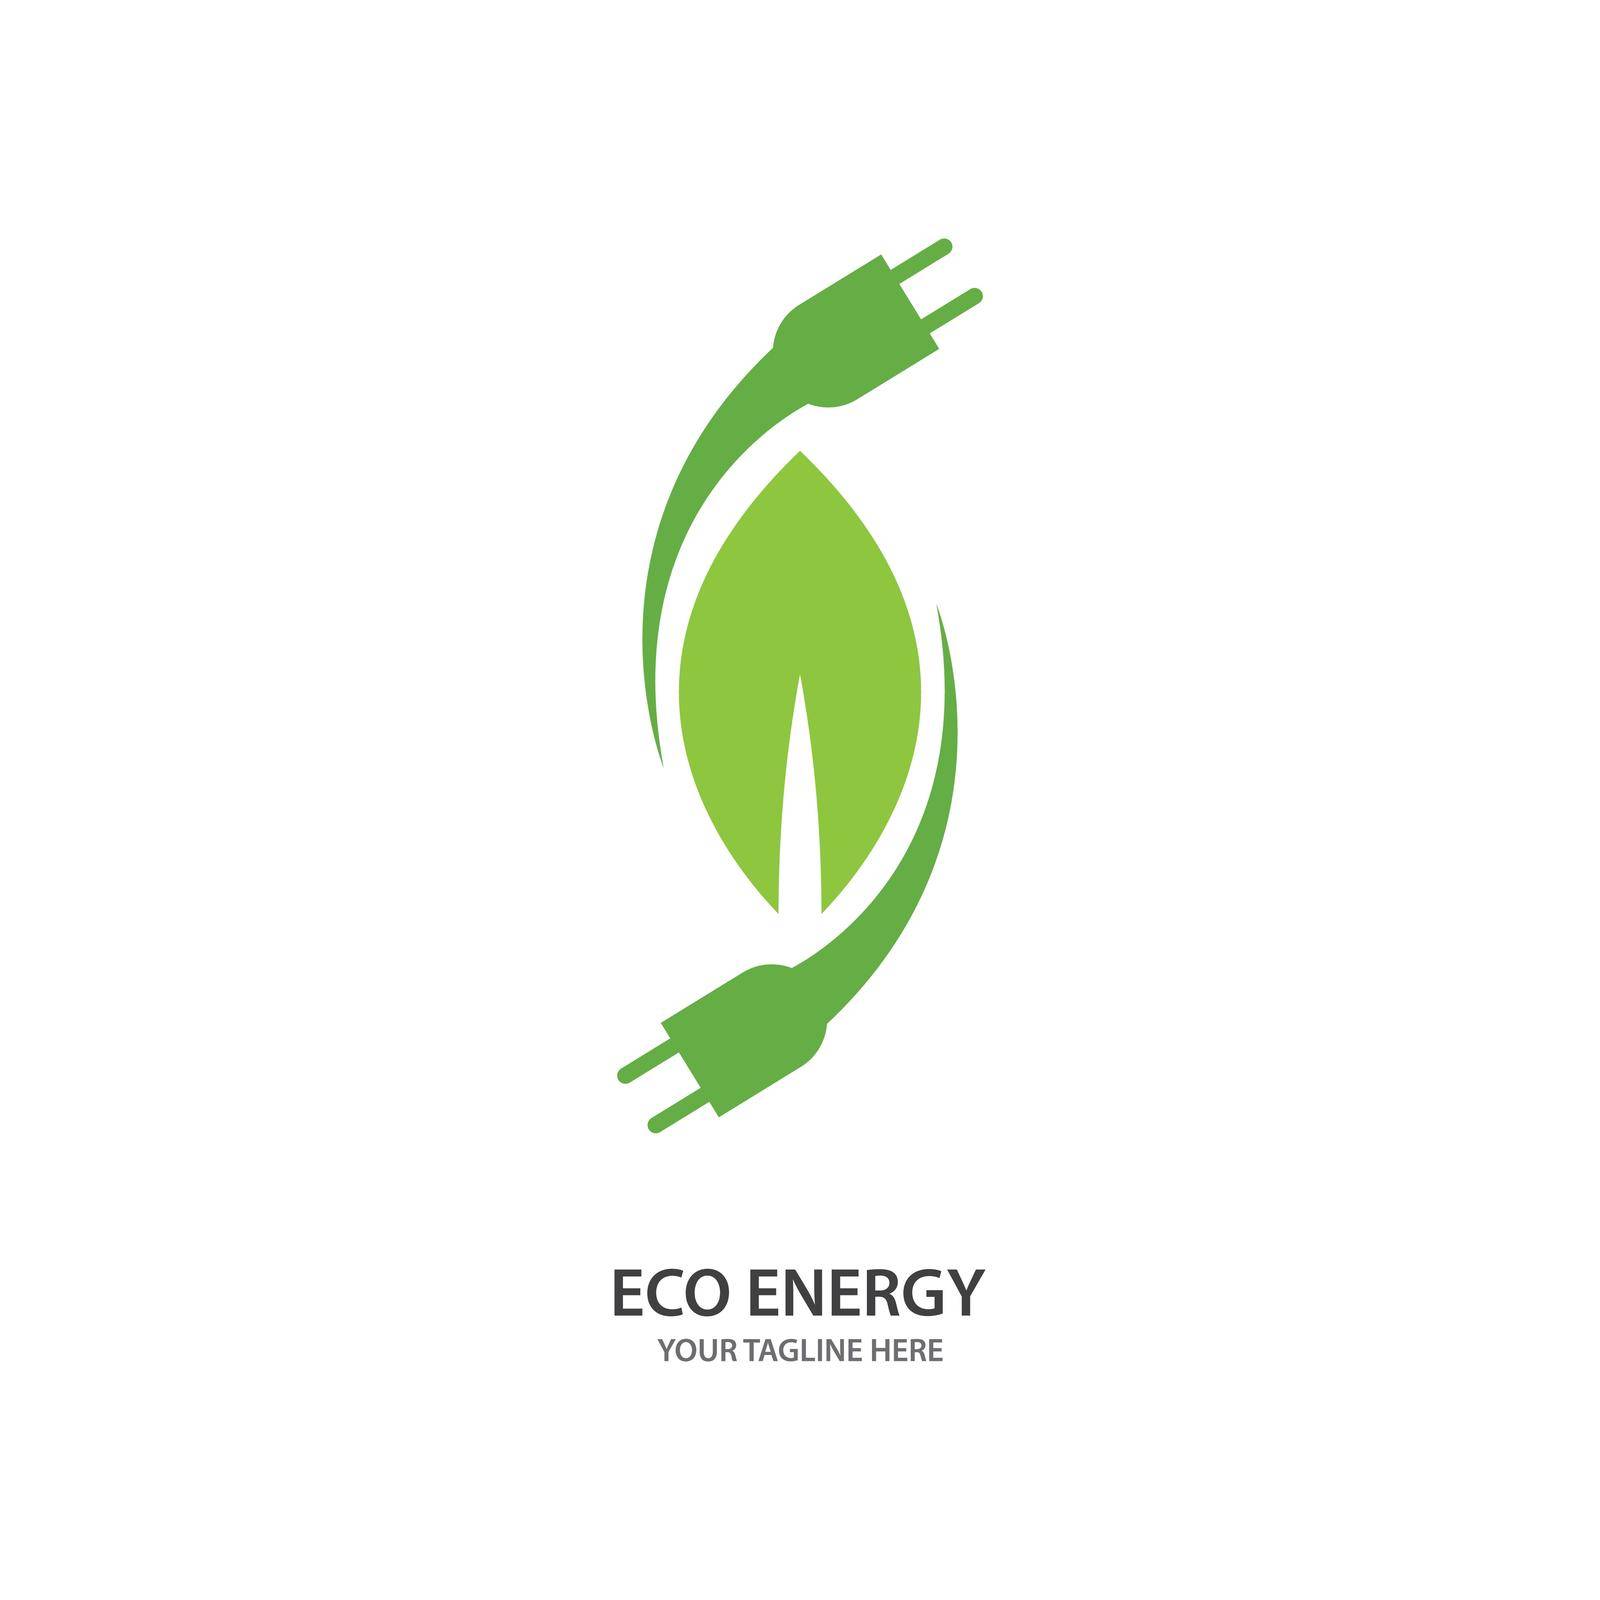 Eco energy by awk